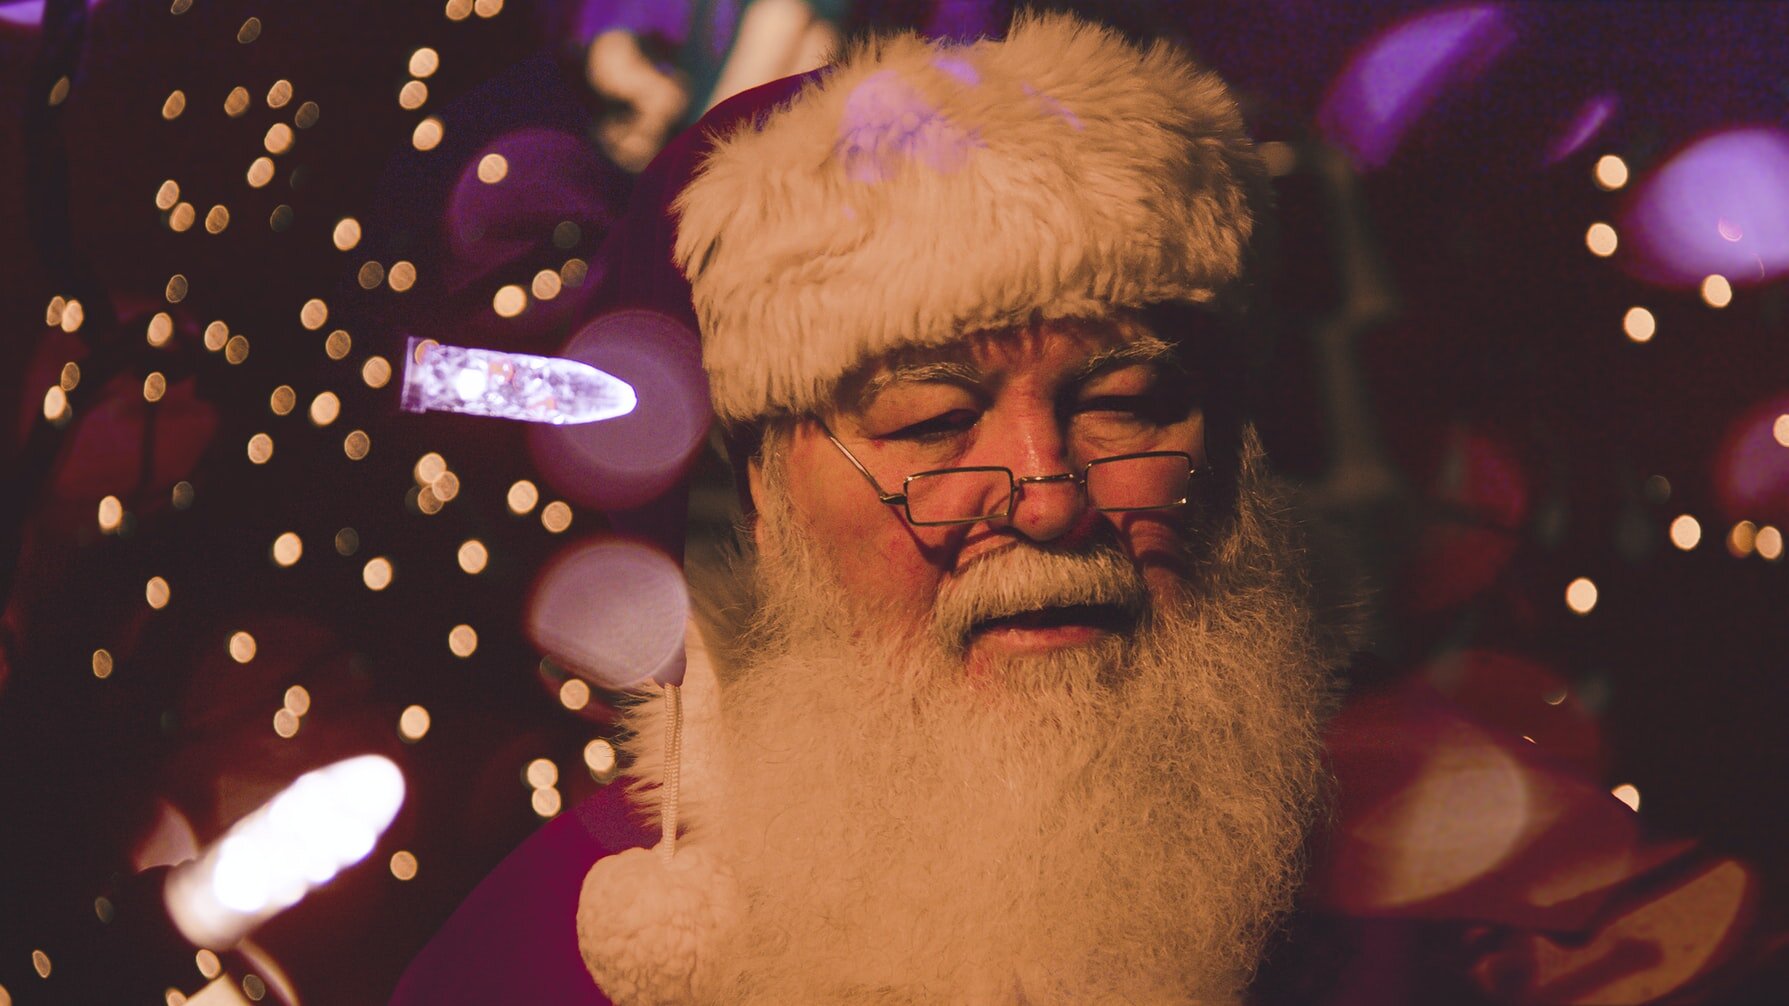 How to set up and sell tickets to the perfect Santa’s Grotto